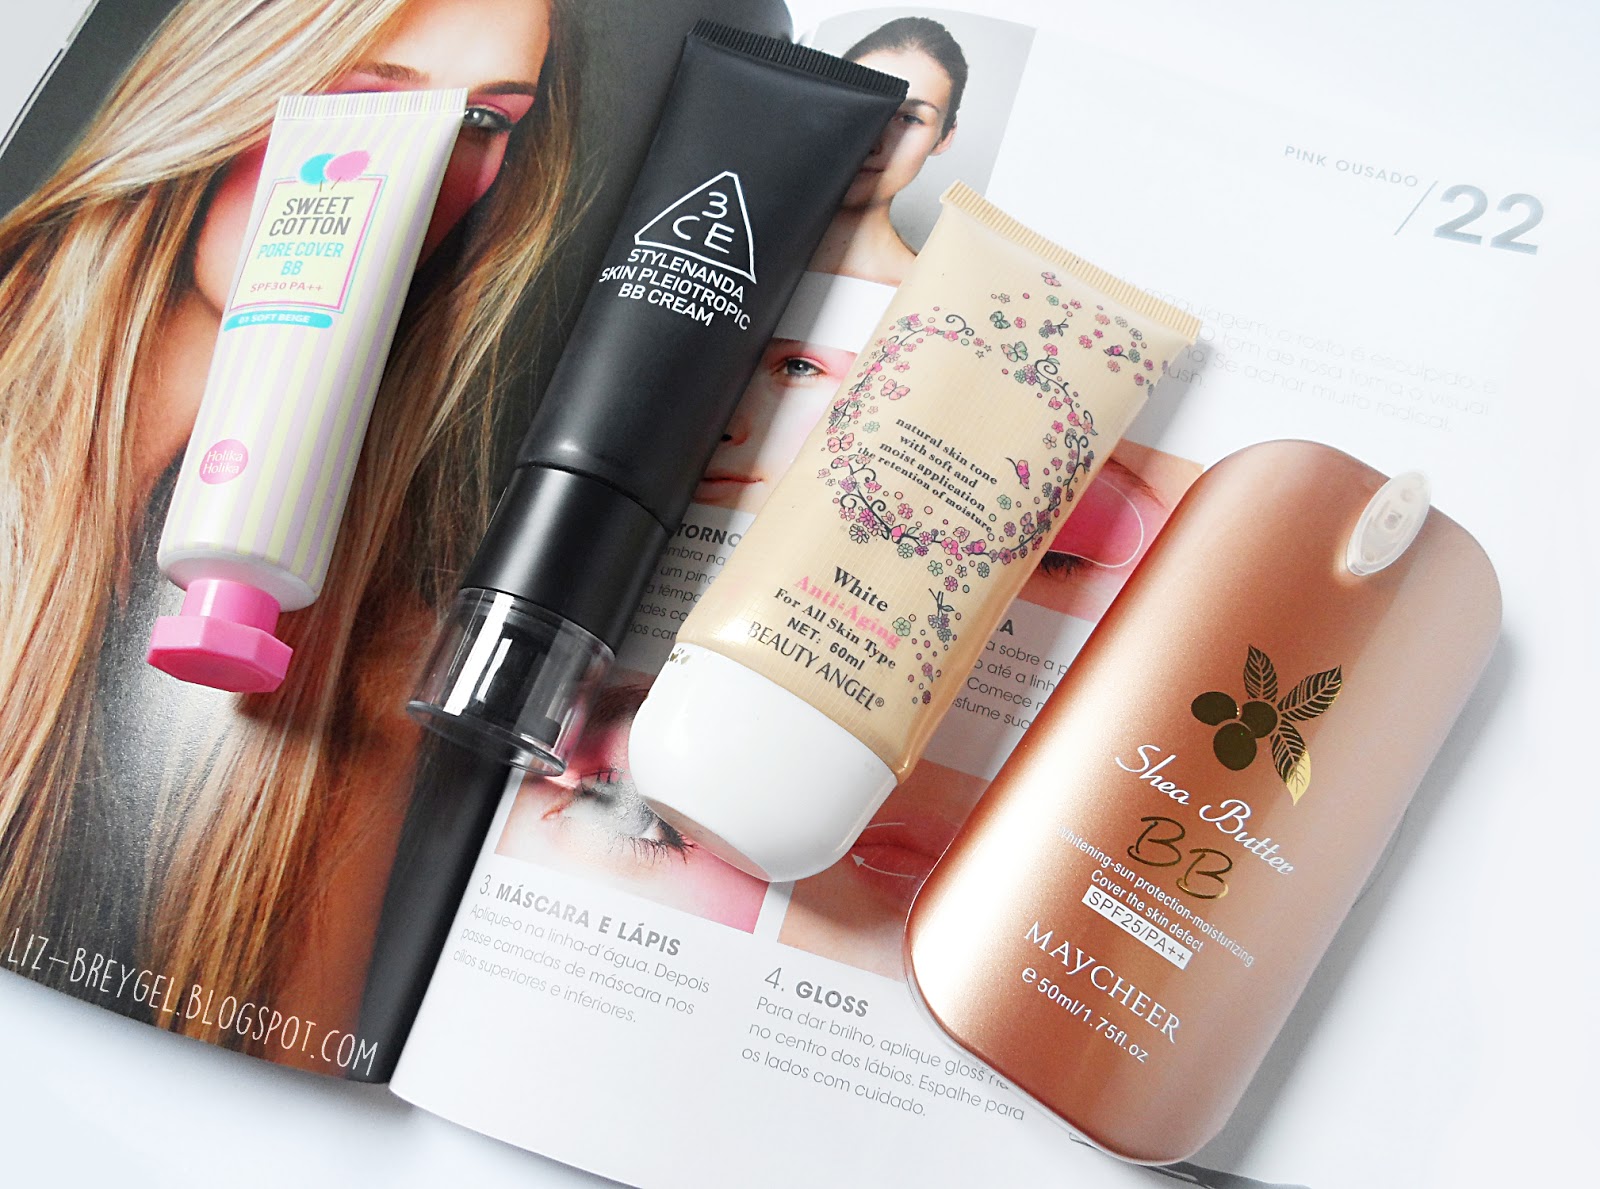 bb cream holika holika 3 concept eyes maycheer beauty angel review swatches liz breygel blogger pictures